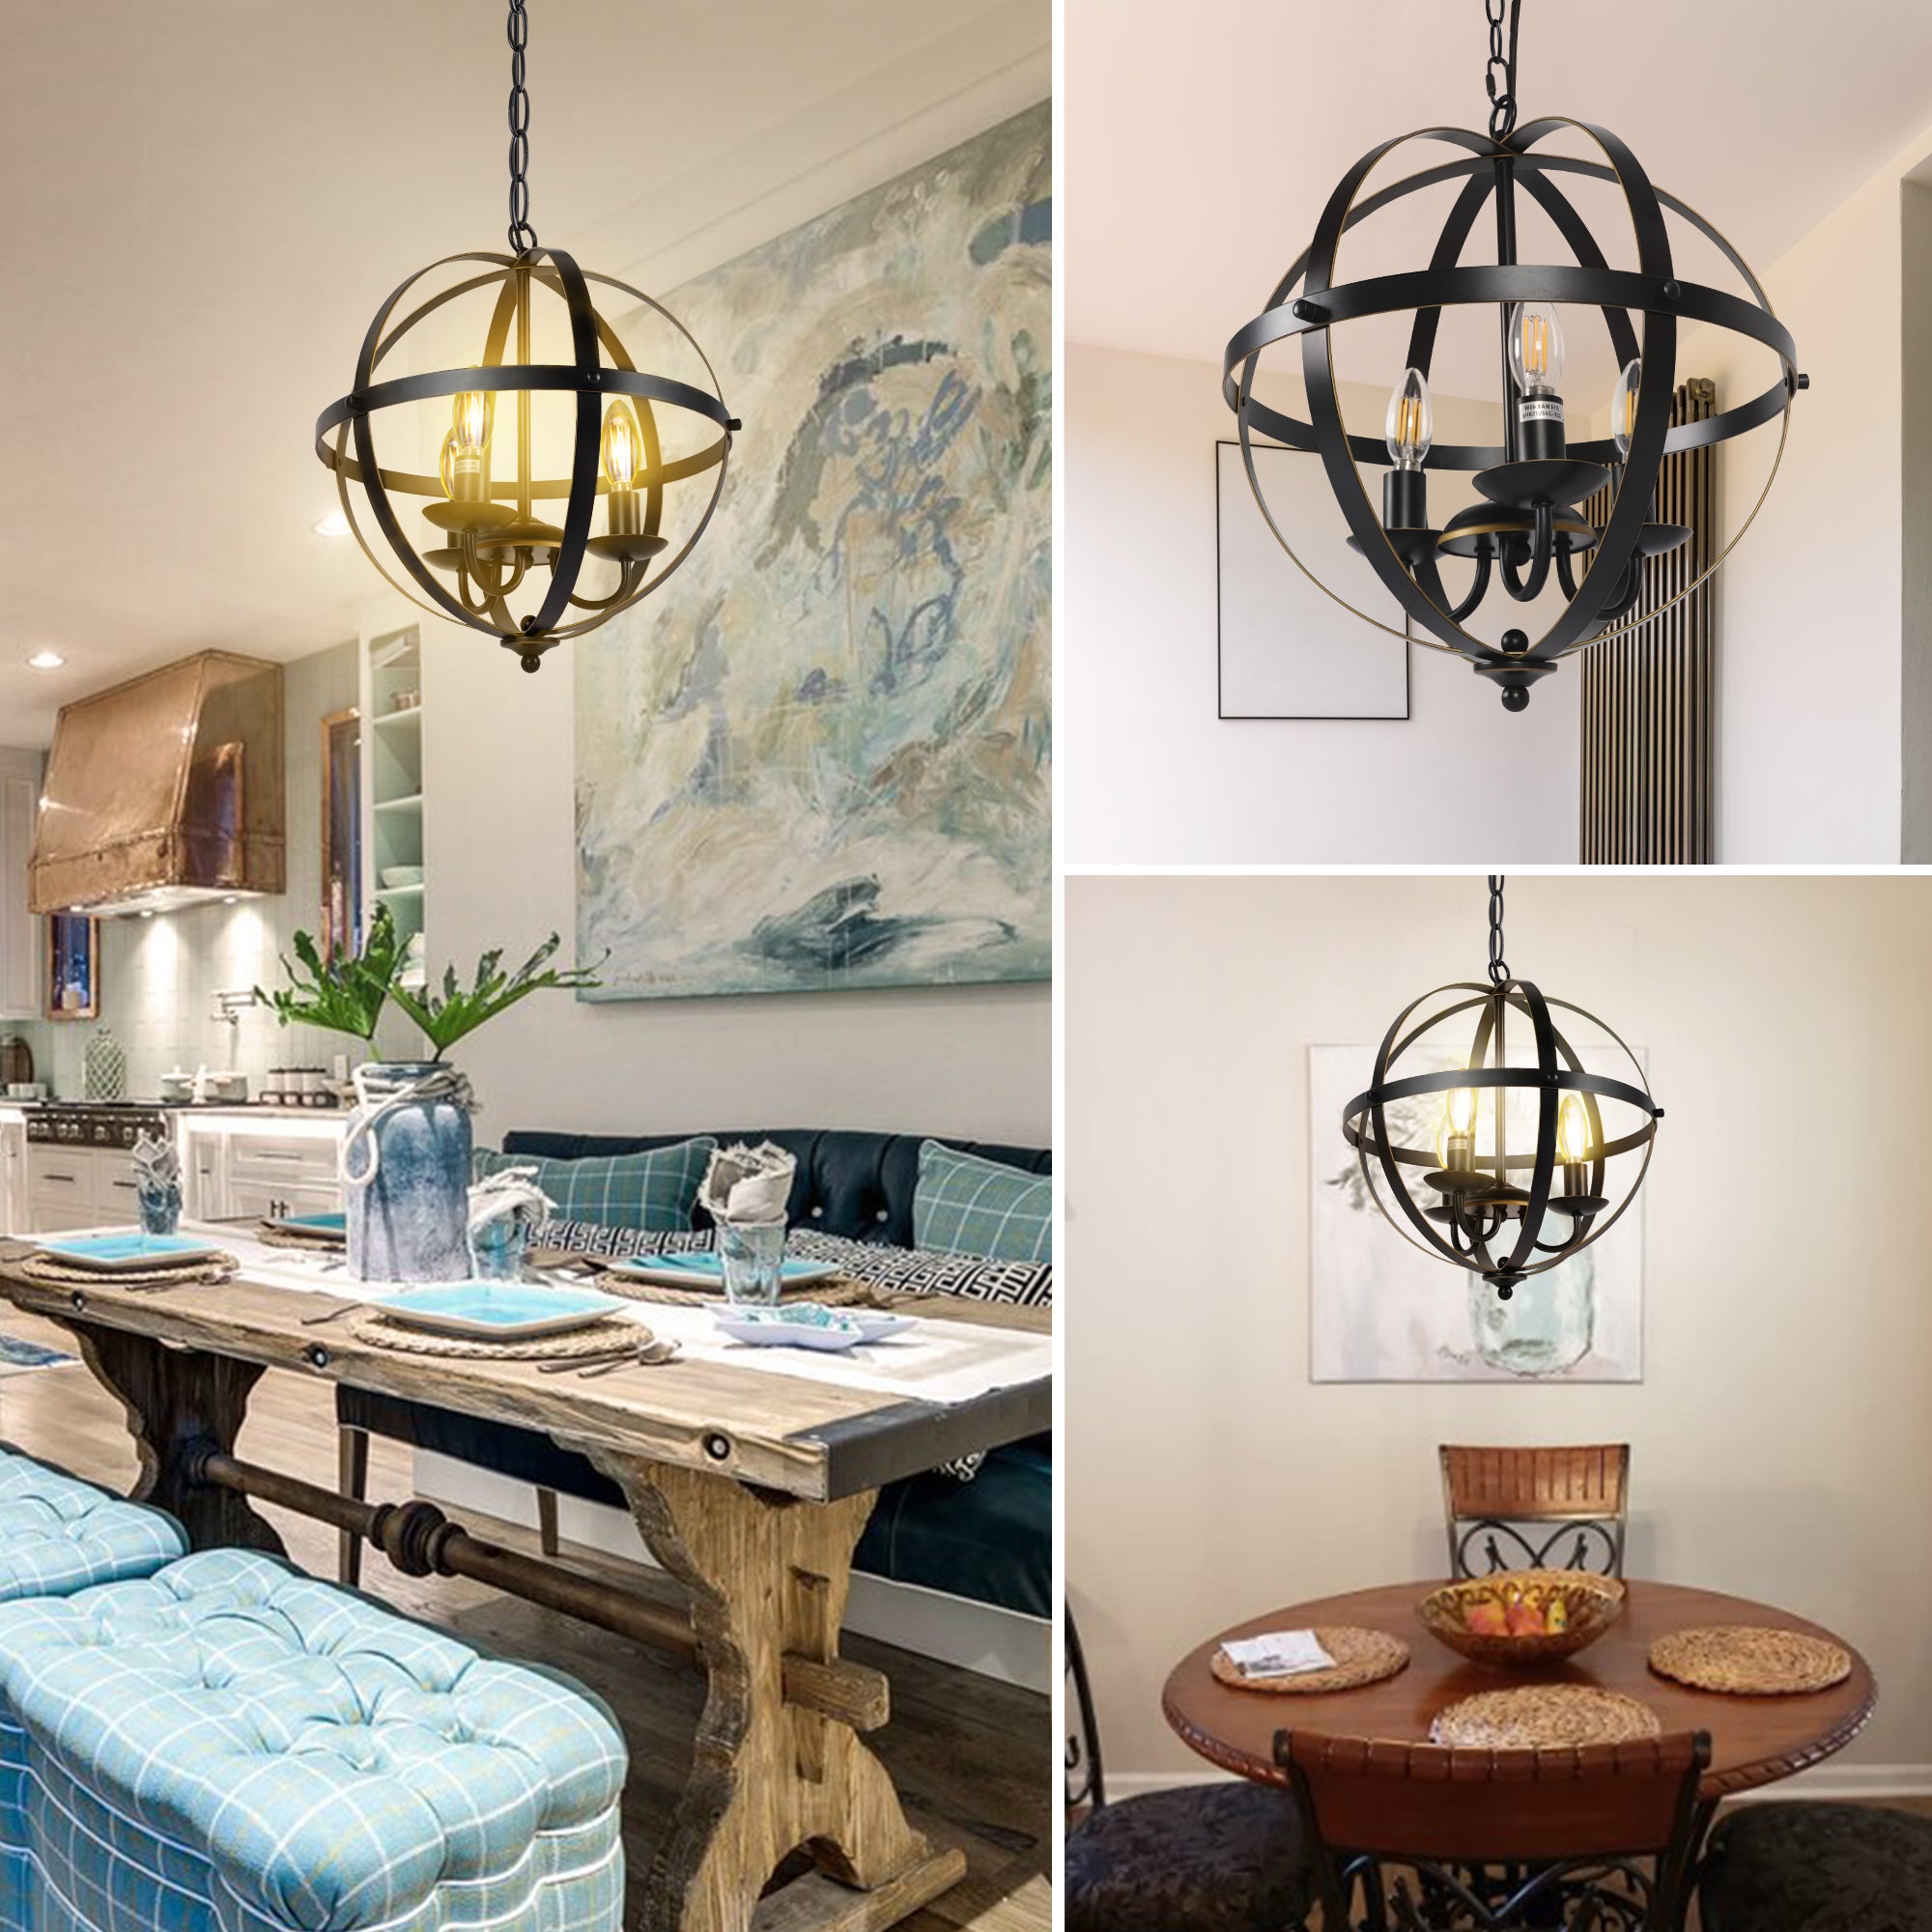 OUTON 3 Light Vintage Pendant Hanging Light with Metal Ring Design for Dining room Living room